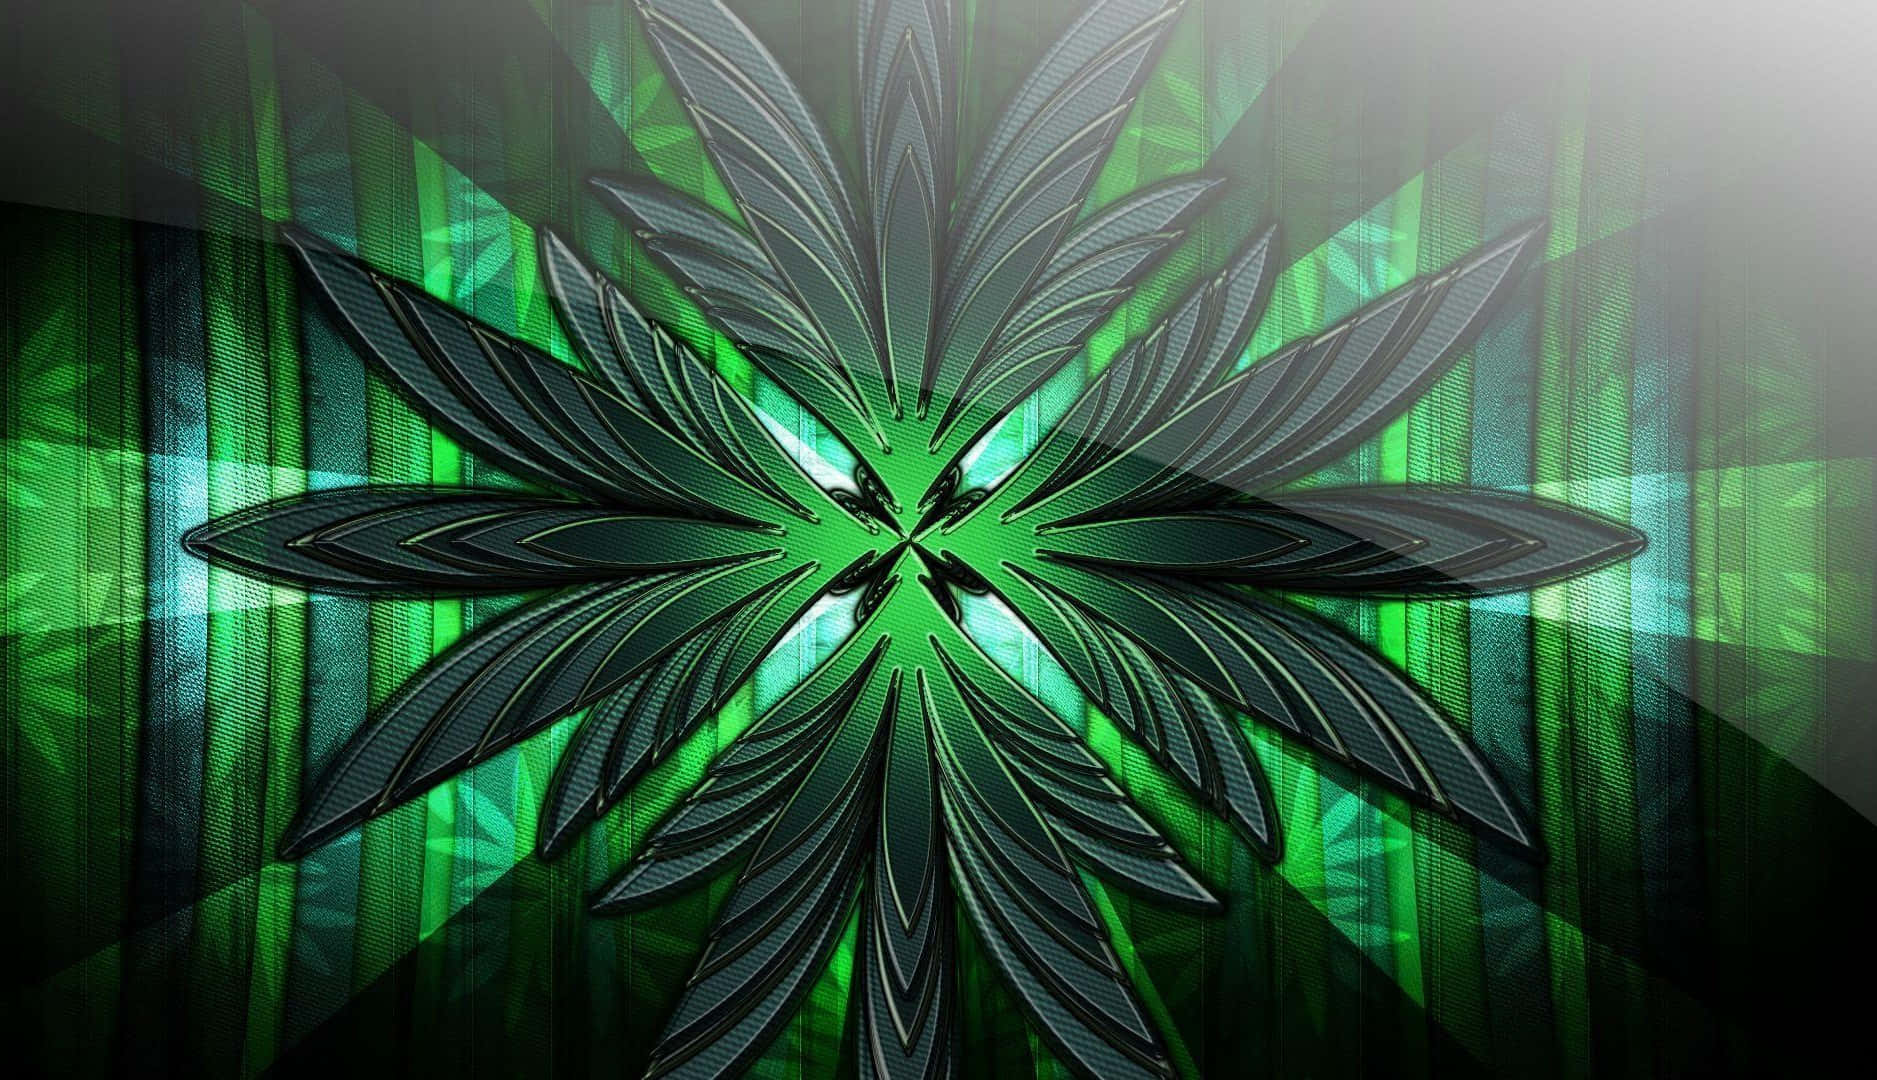 Abstract Floral Digital Art